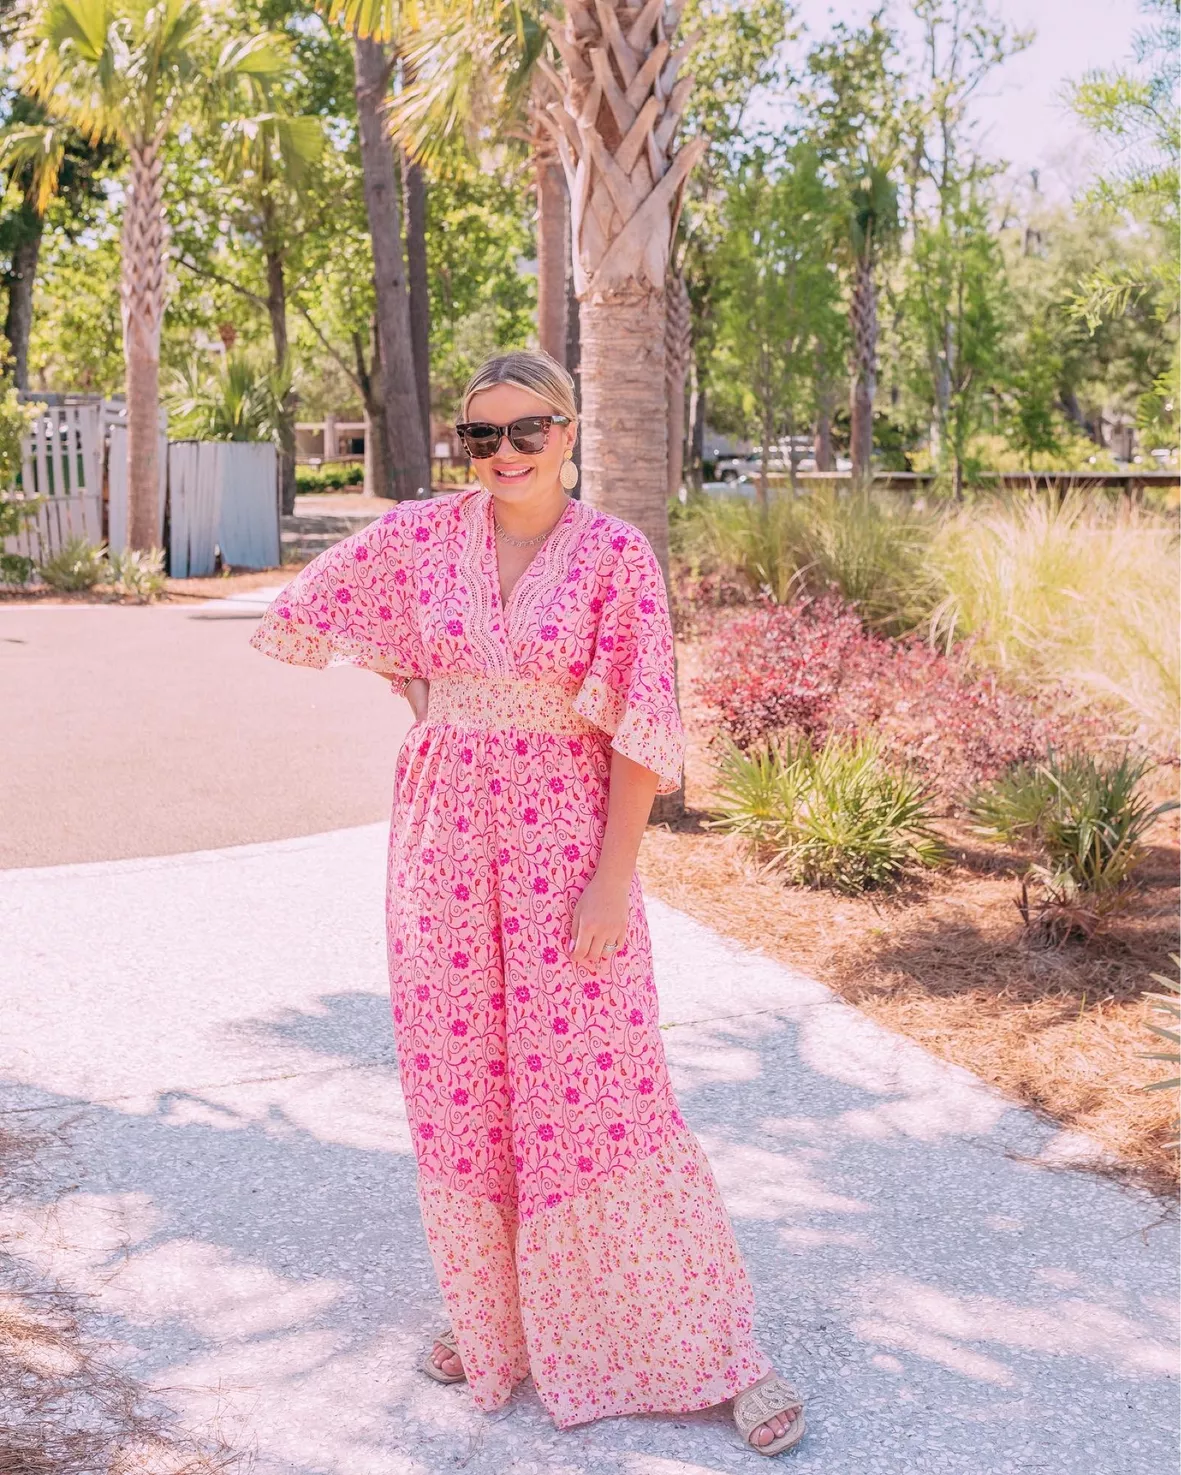 How To Style Floral Dresses For Spring: Outfit Inspiration